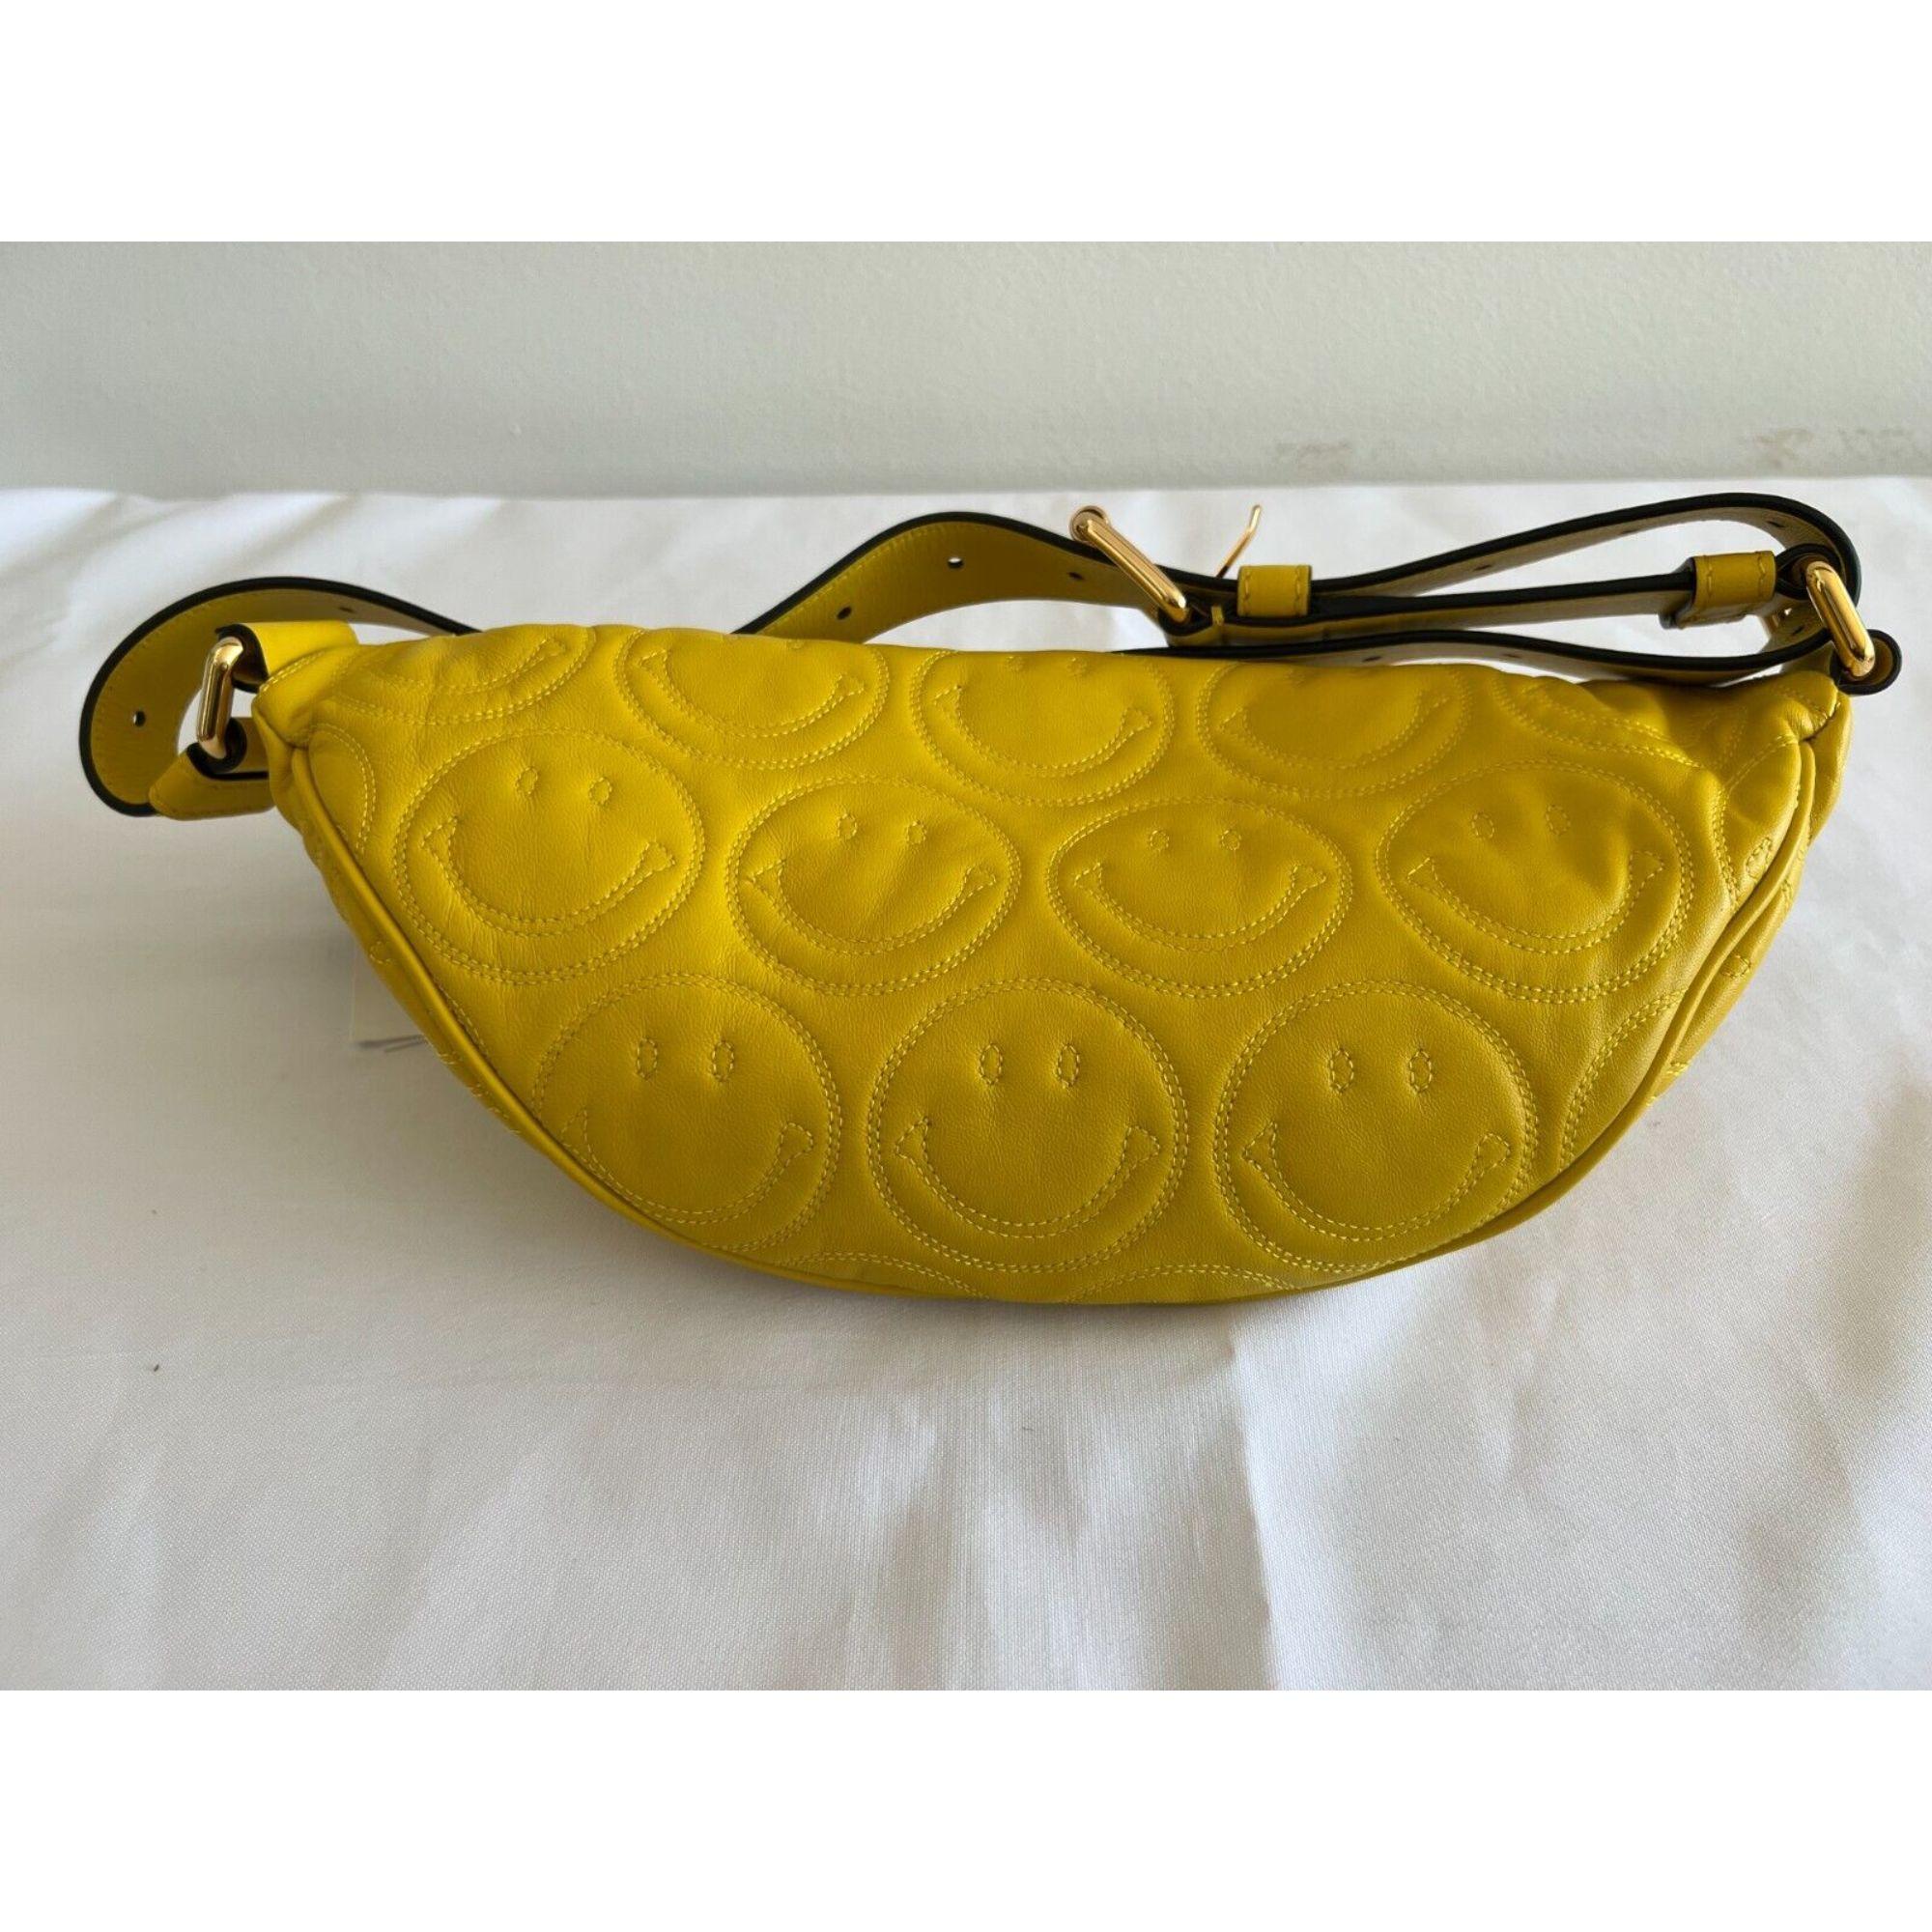 SS21 Moschino Couture Yellow Fanny Pack with Engraved Smiley by Jeremy Scott For Sale 3